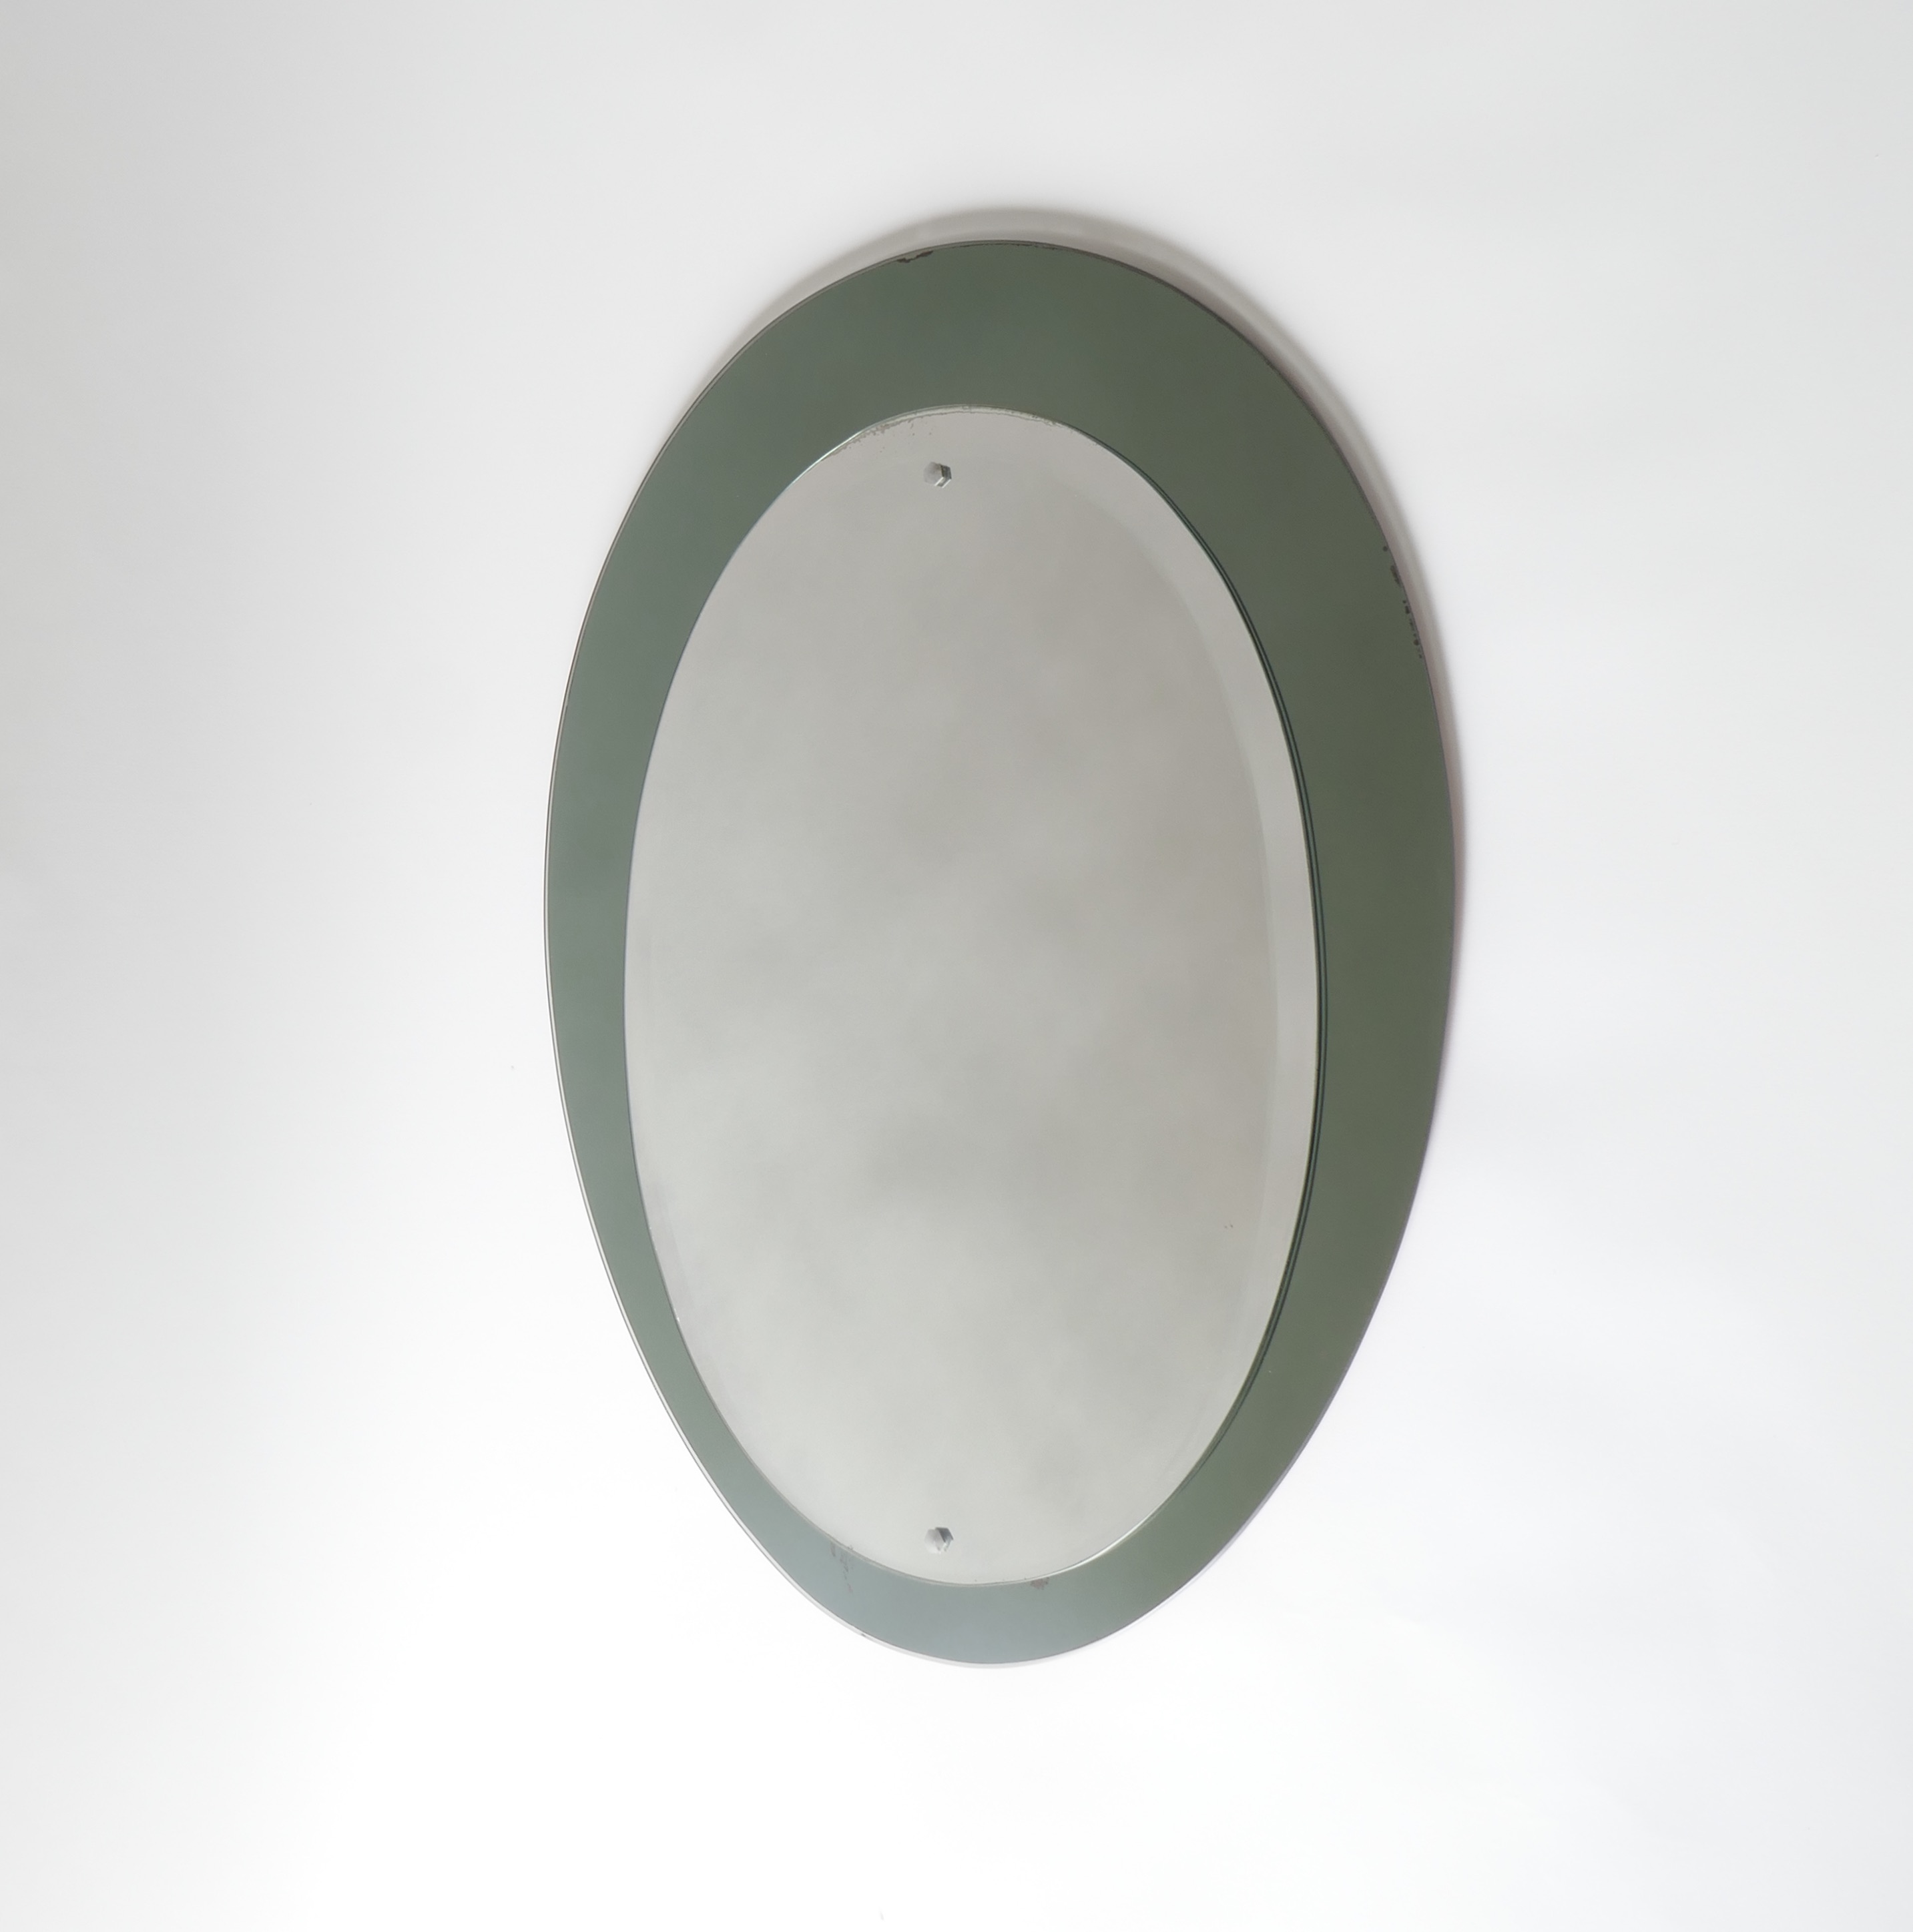 Sold - Mid-Century Oval Mirror with a Green Smoked Mirrored Frame, Italy, 1960s